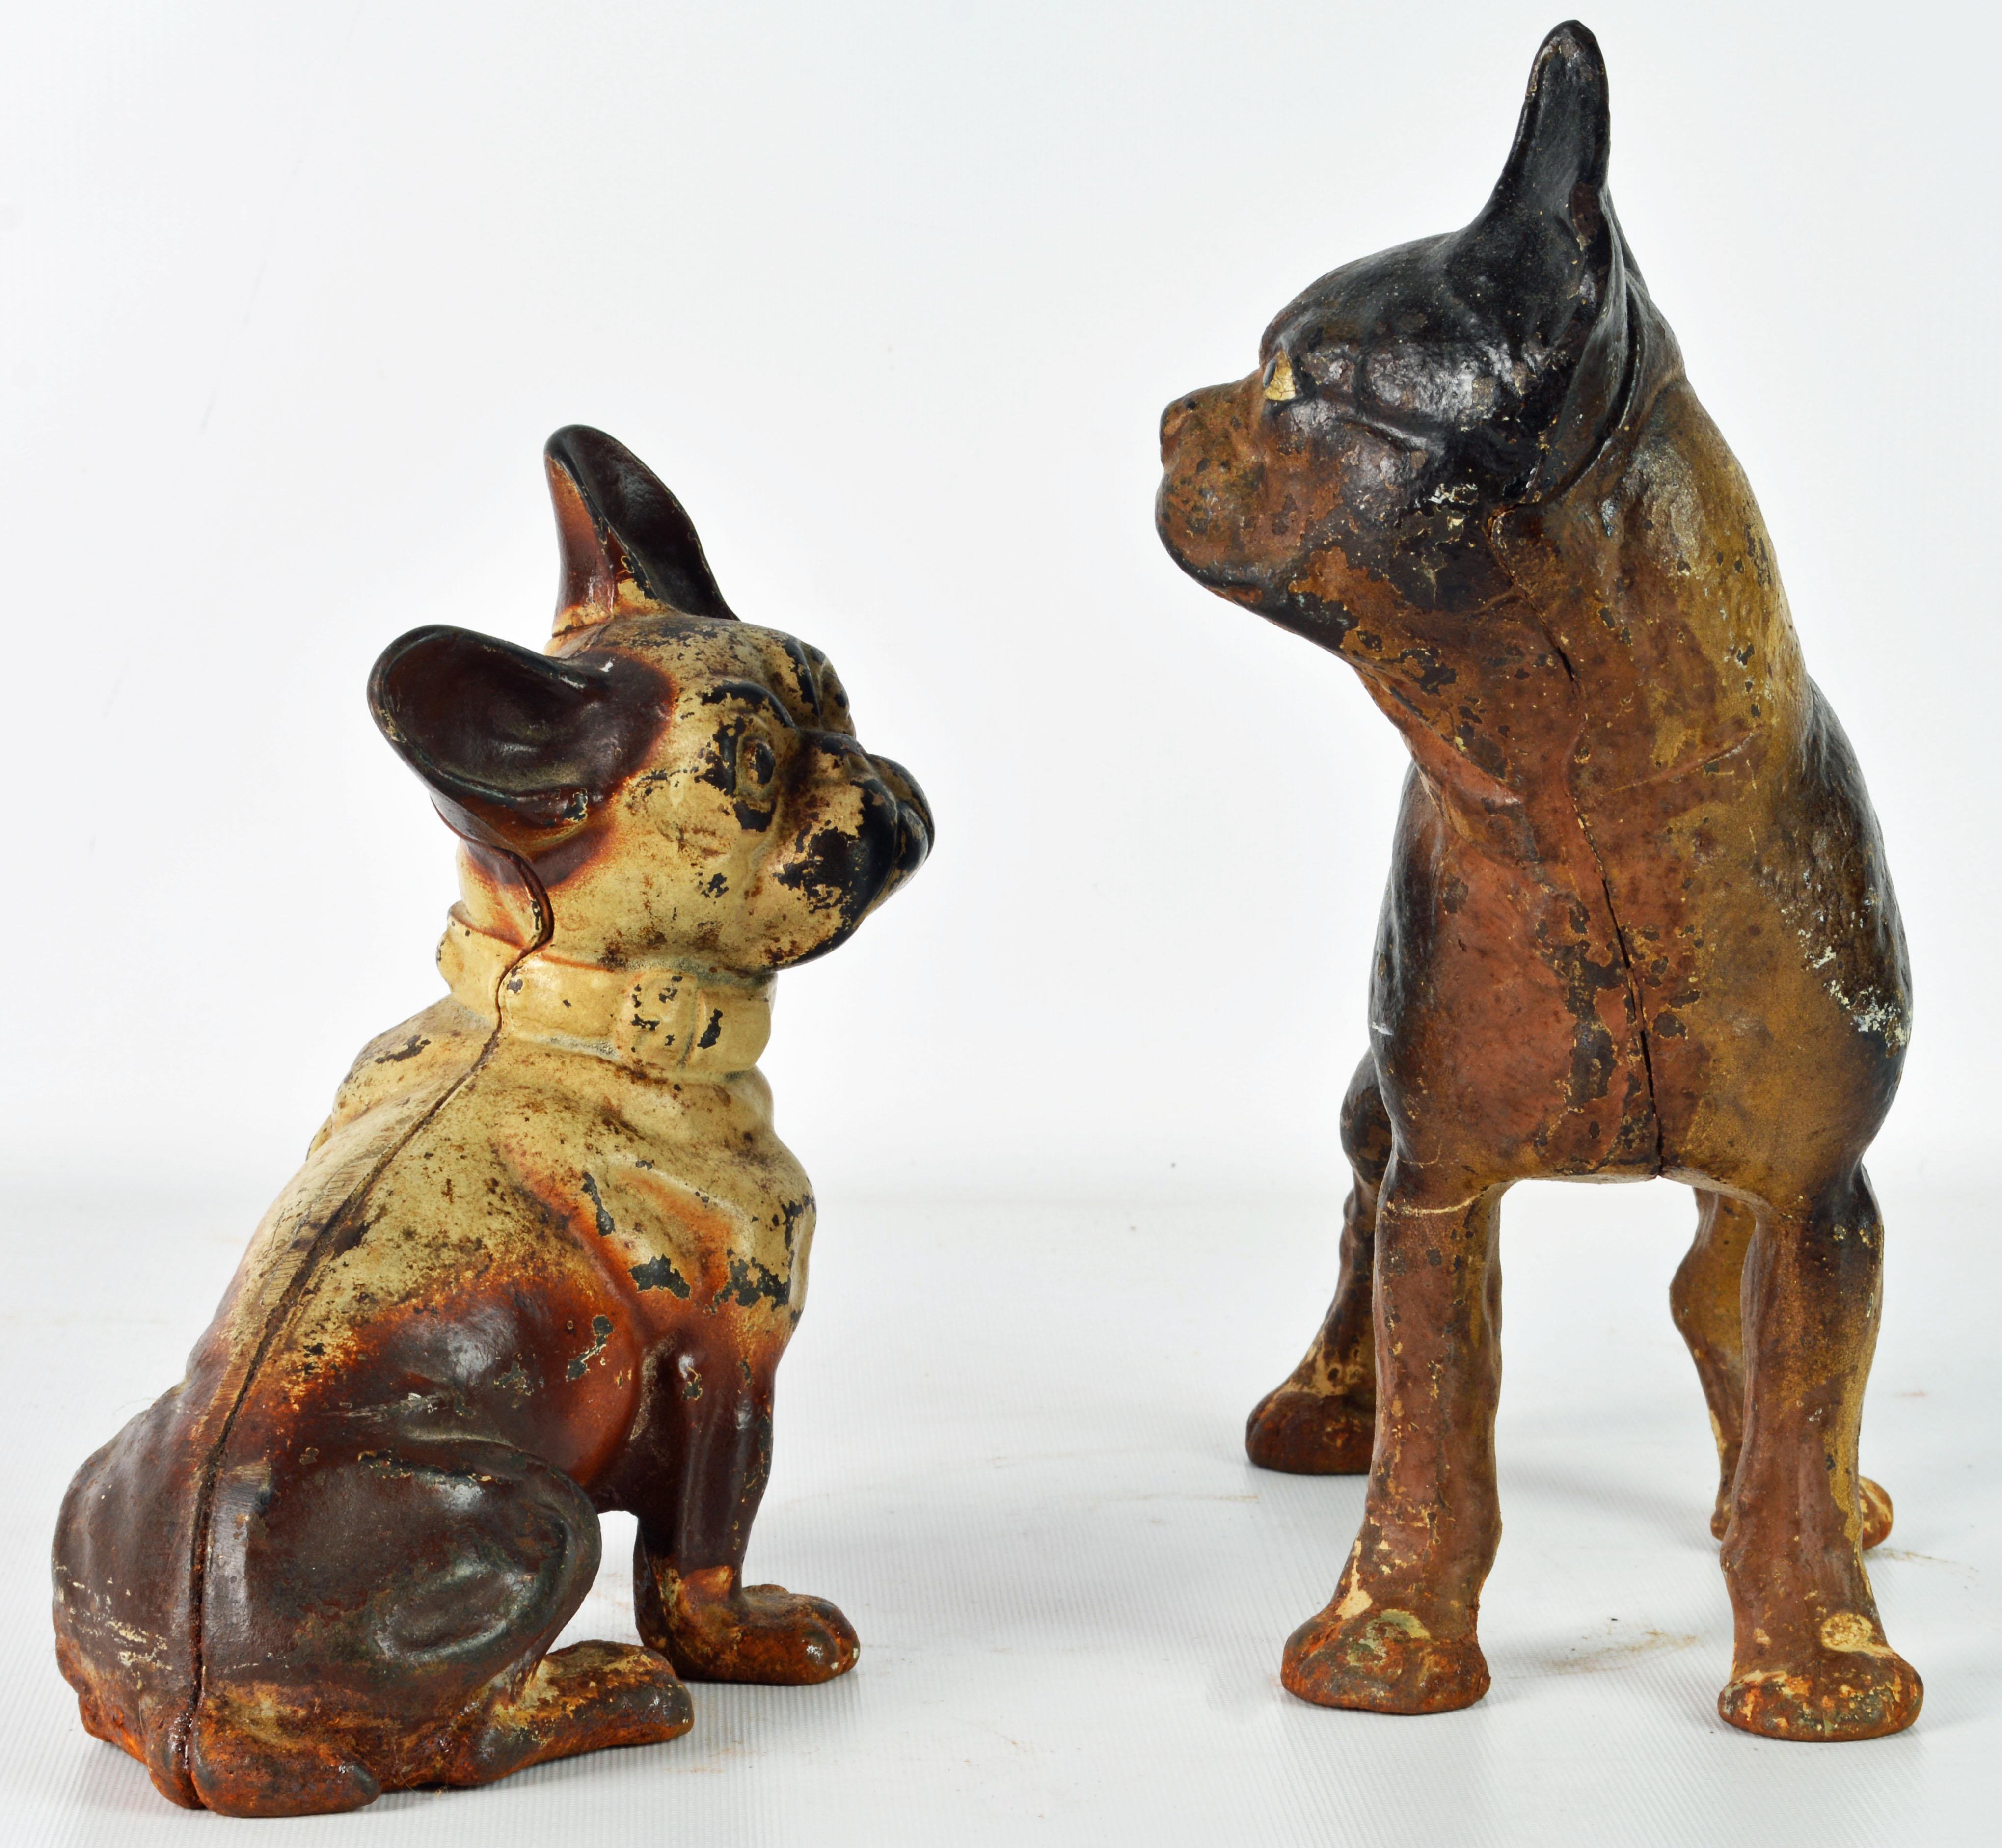 A most fetching sight. The dogs compliment each other well and show a nice overall wear to the color surfaces. Measurements refer to the largest dog.
Decorative doorstops weren’t widely used in American homes until after the Civil War, and most